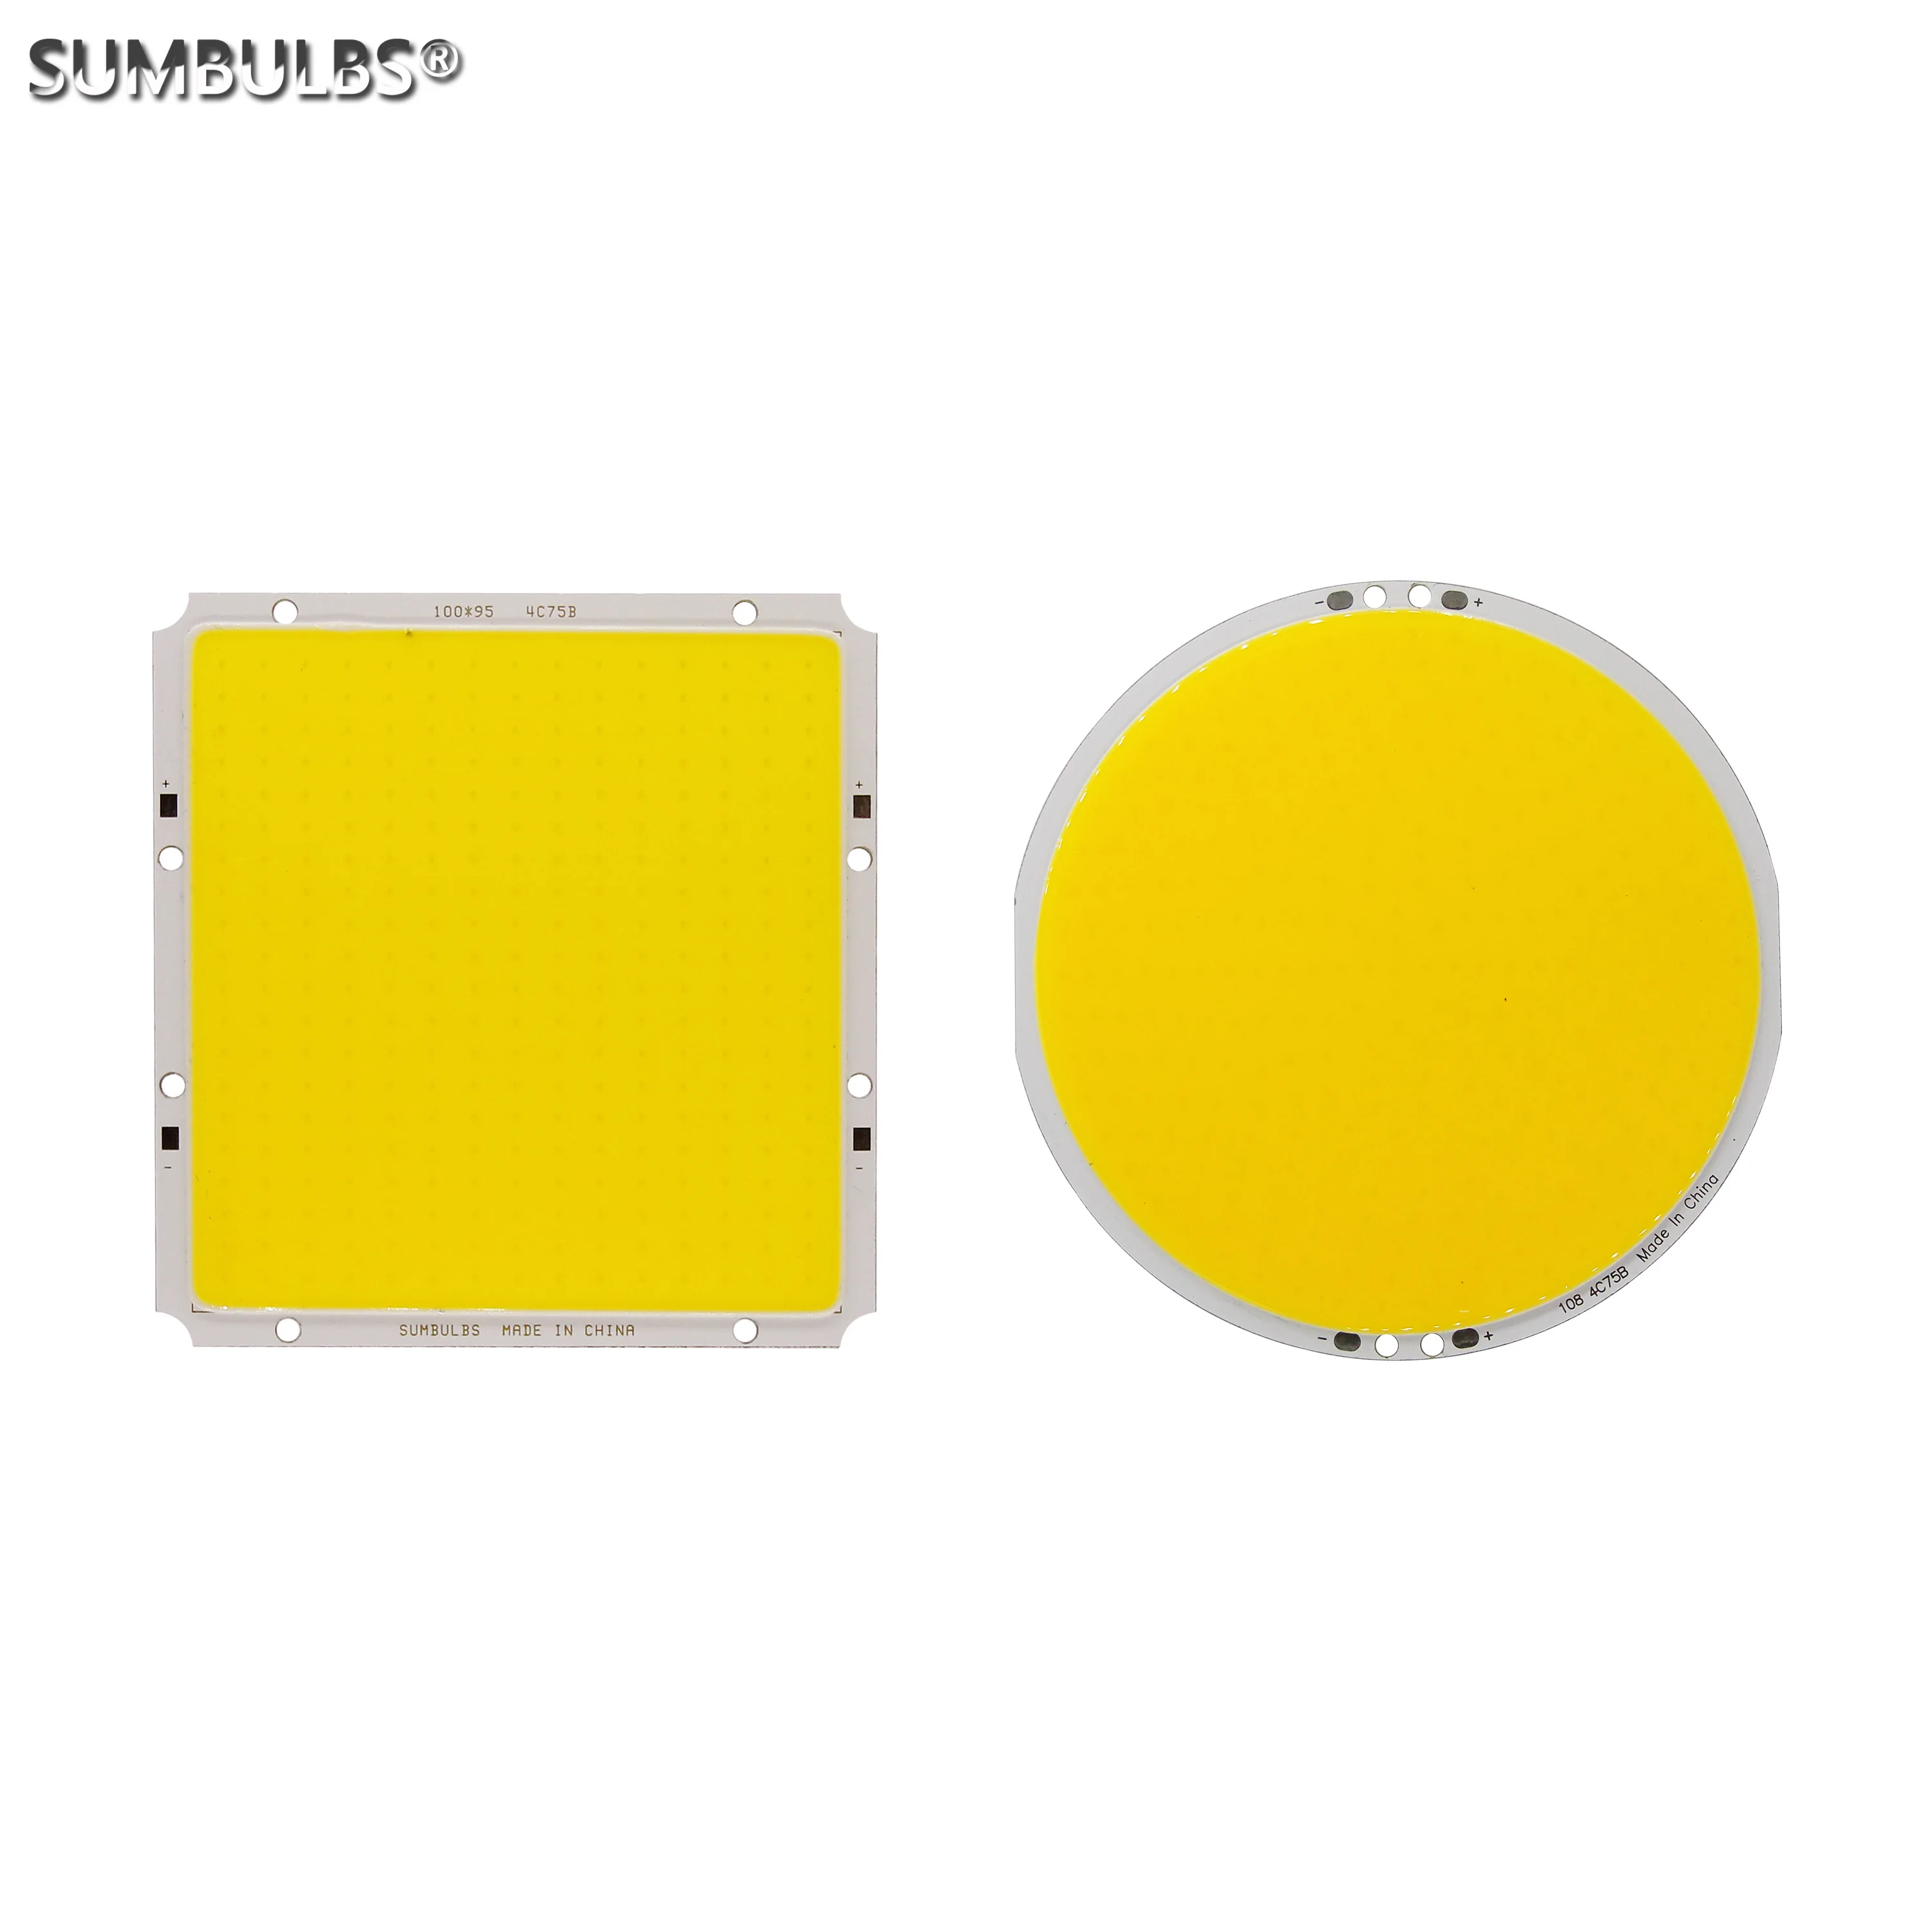 50W LED COB Light Source DC12V Dimmable Panel Lighting Chip Bulb With Dimmer 100*95mm Square 108mm Round Warm Cold White